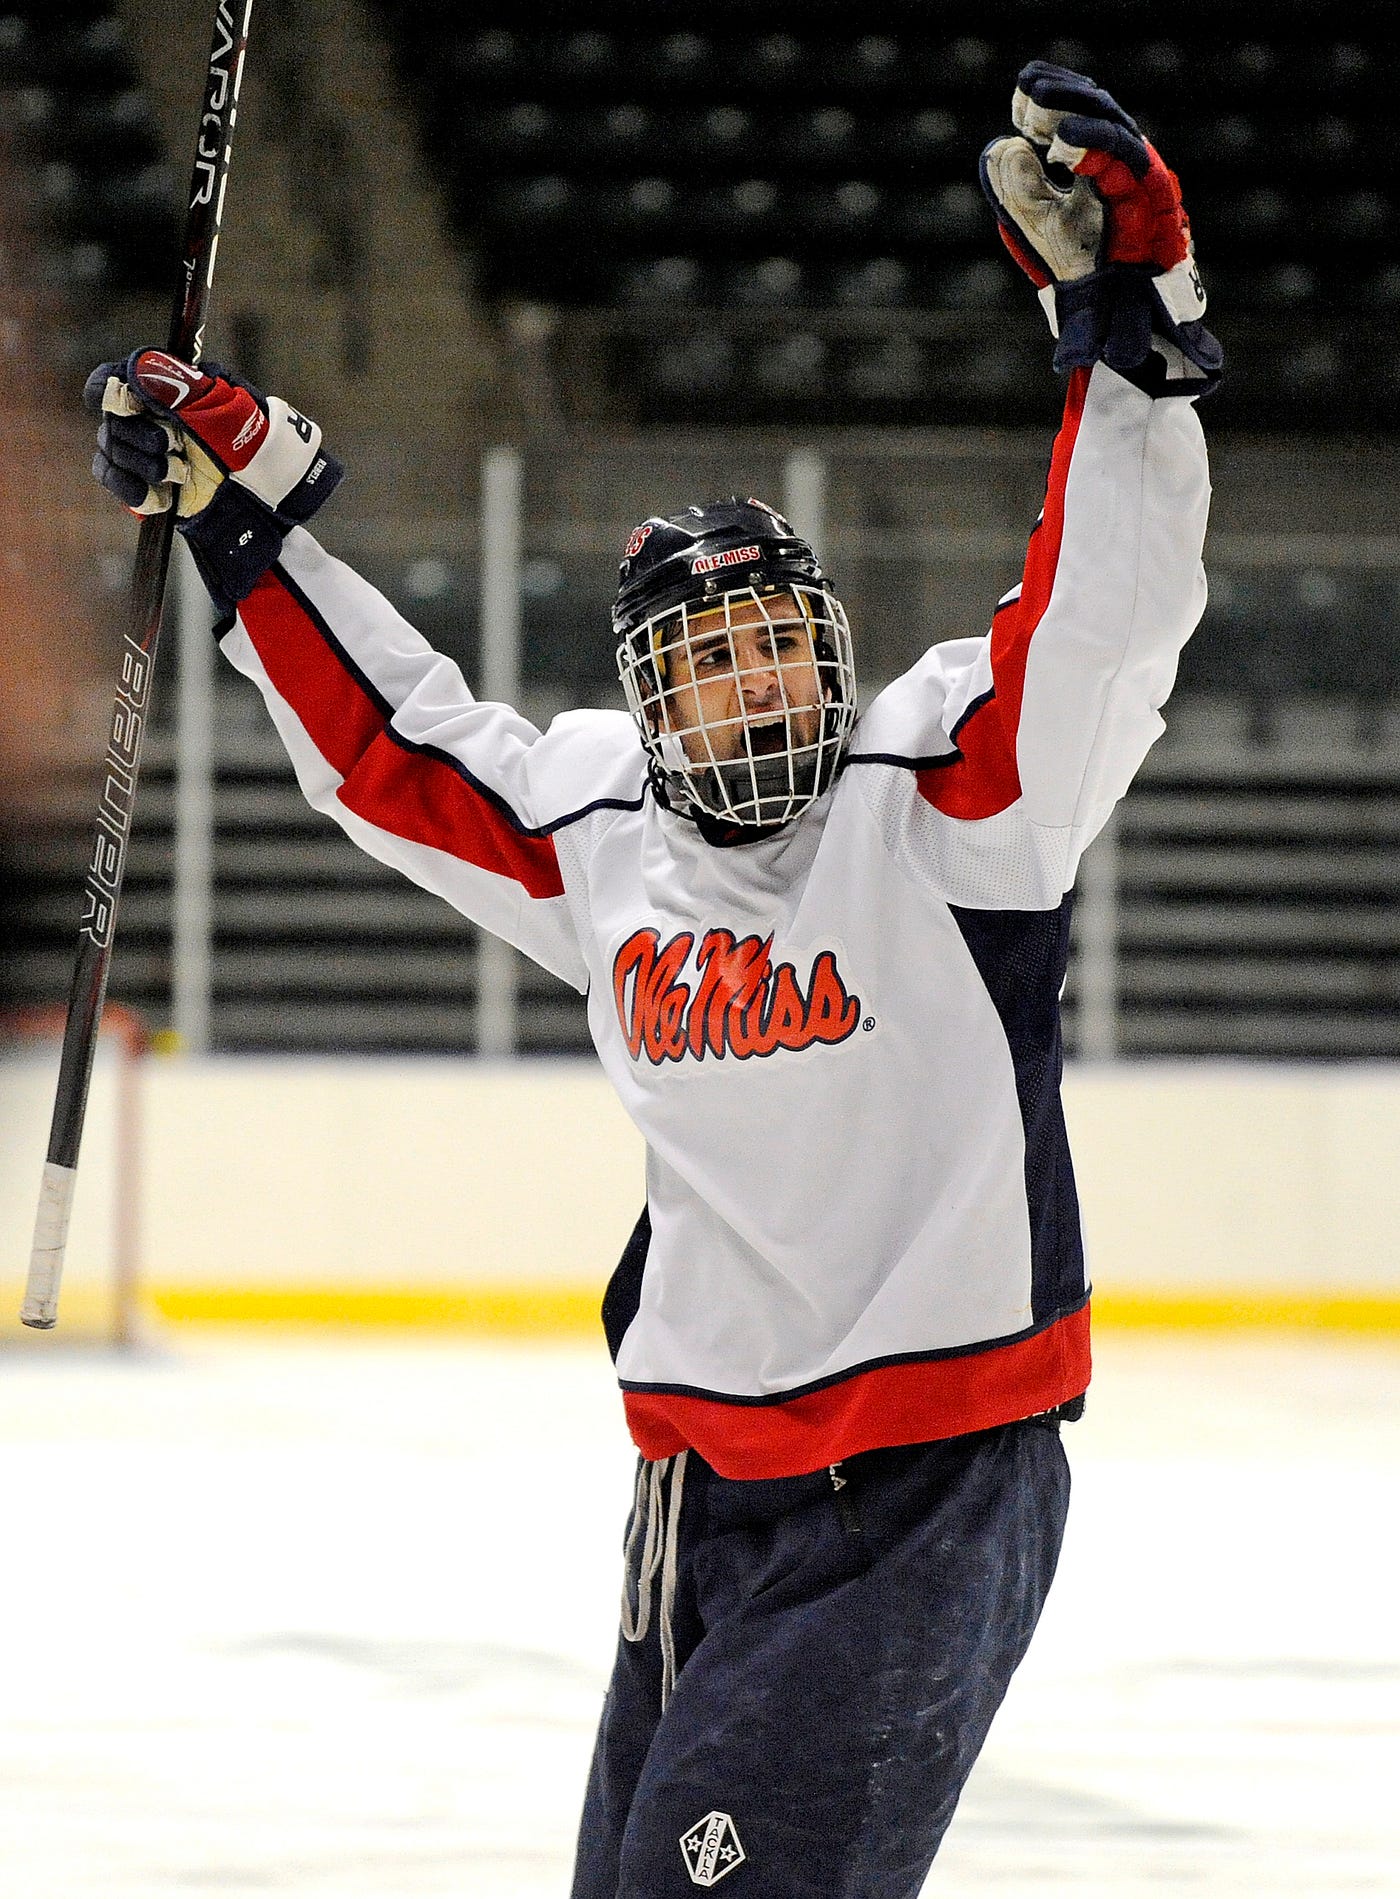 Ole Miss Hockey Helps Business Students Gain Experience - Ole Miss News